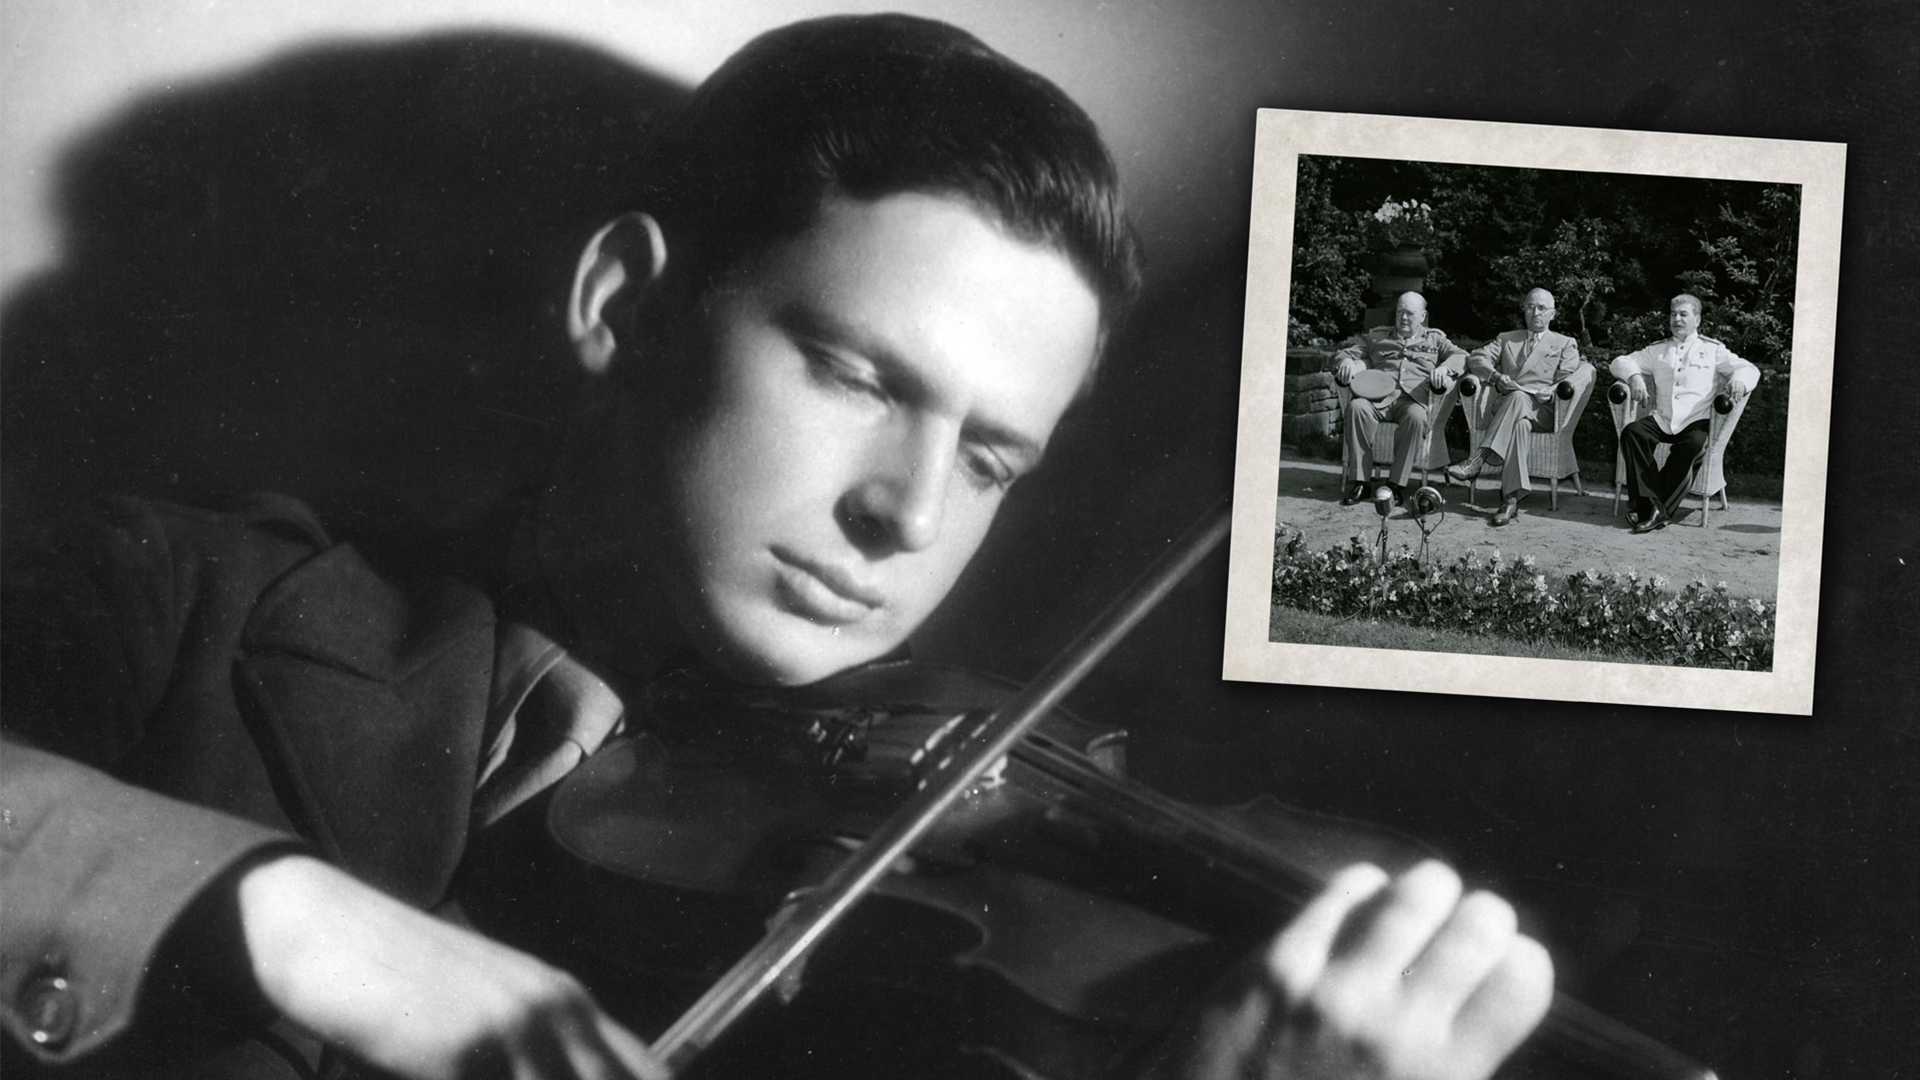 Still image from the film The Rifleman's Violin